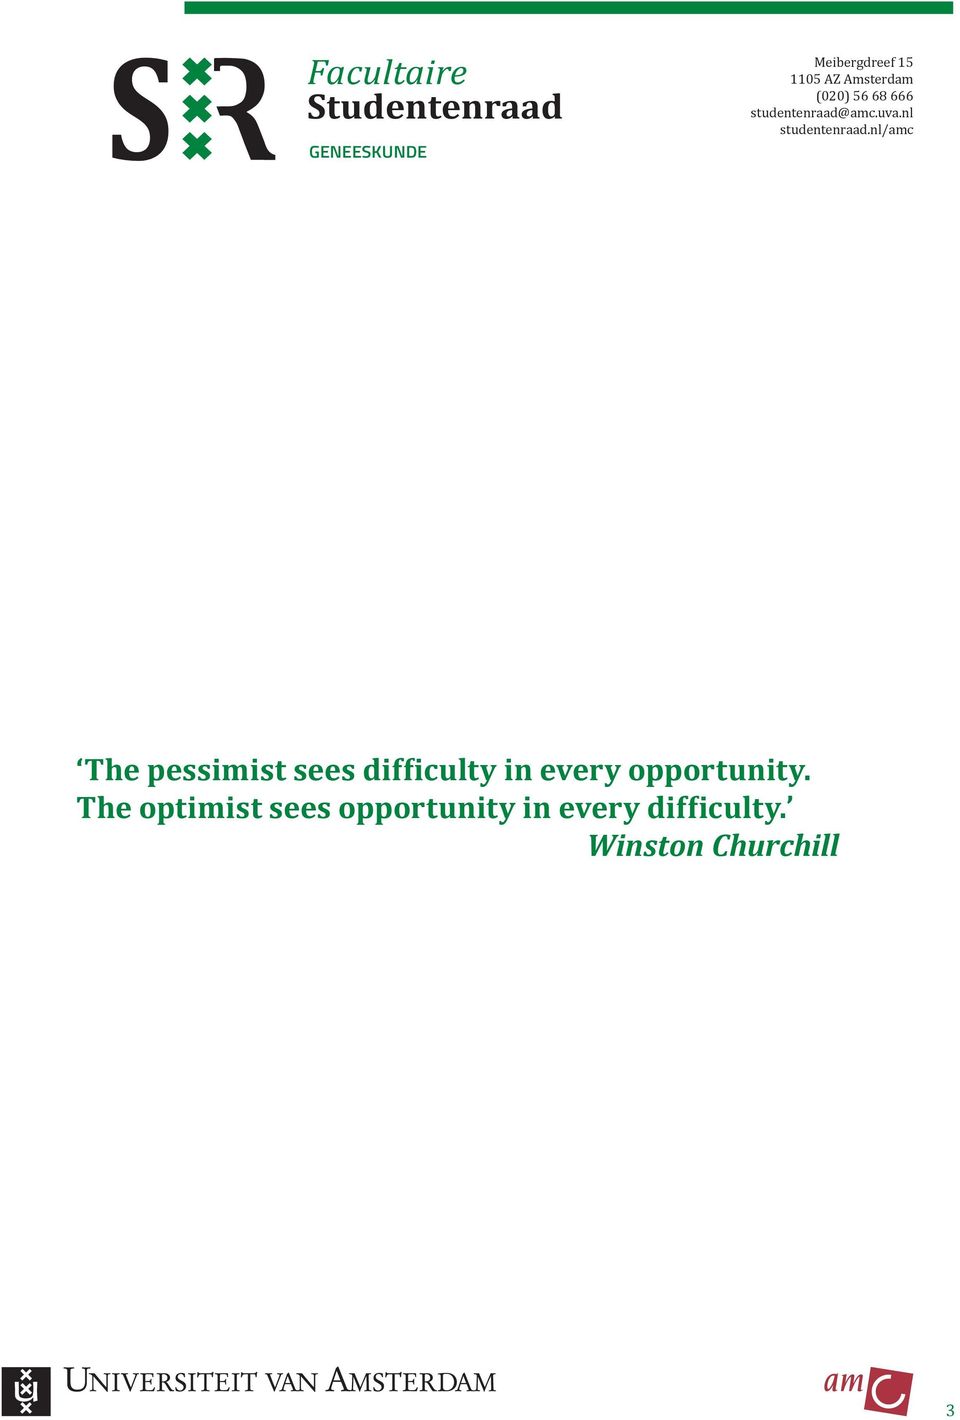 The optimist sees opportunity